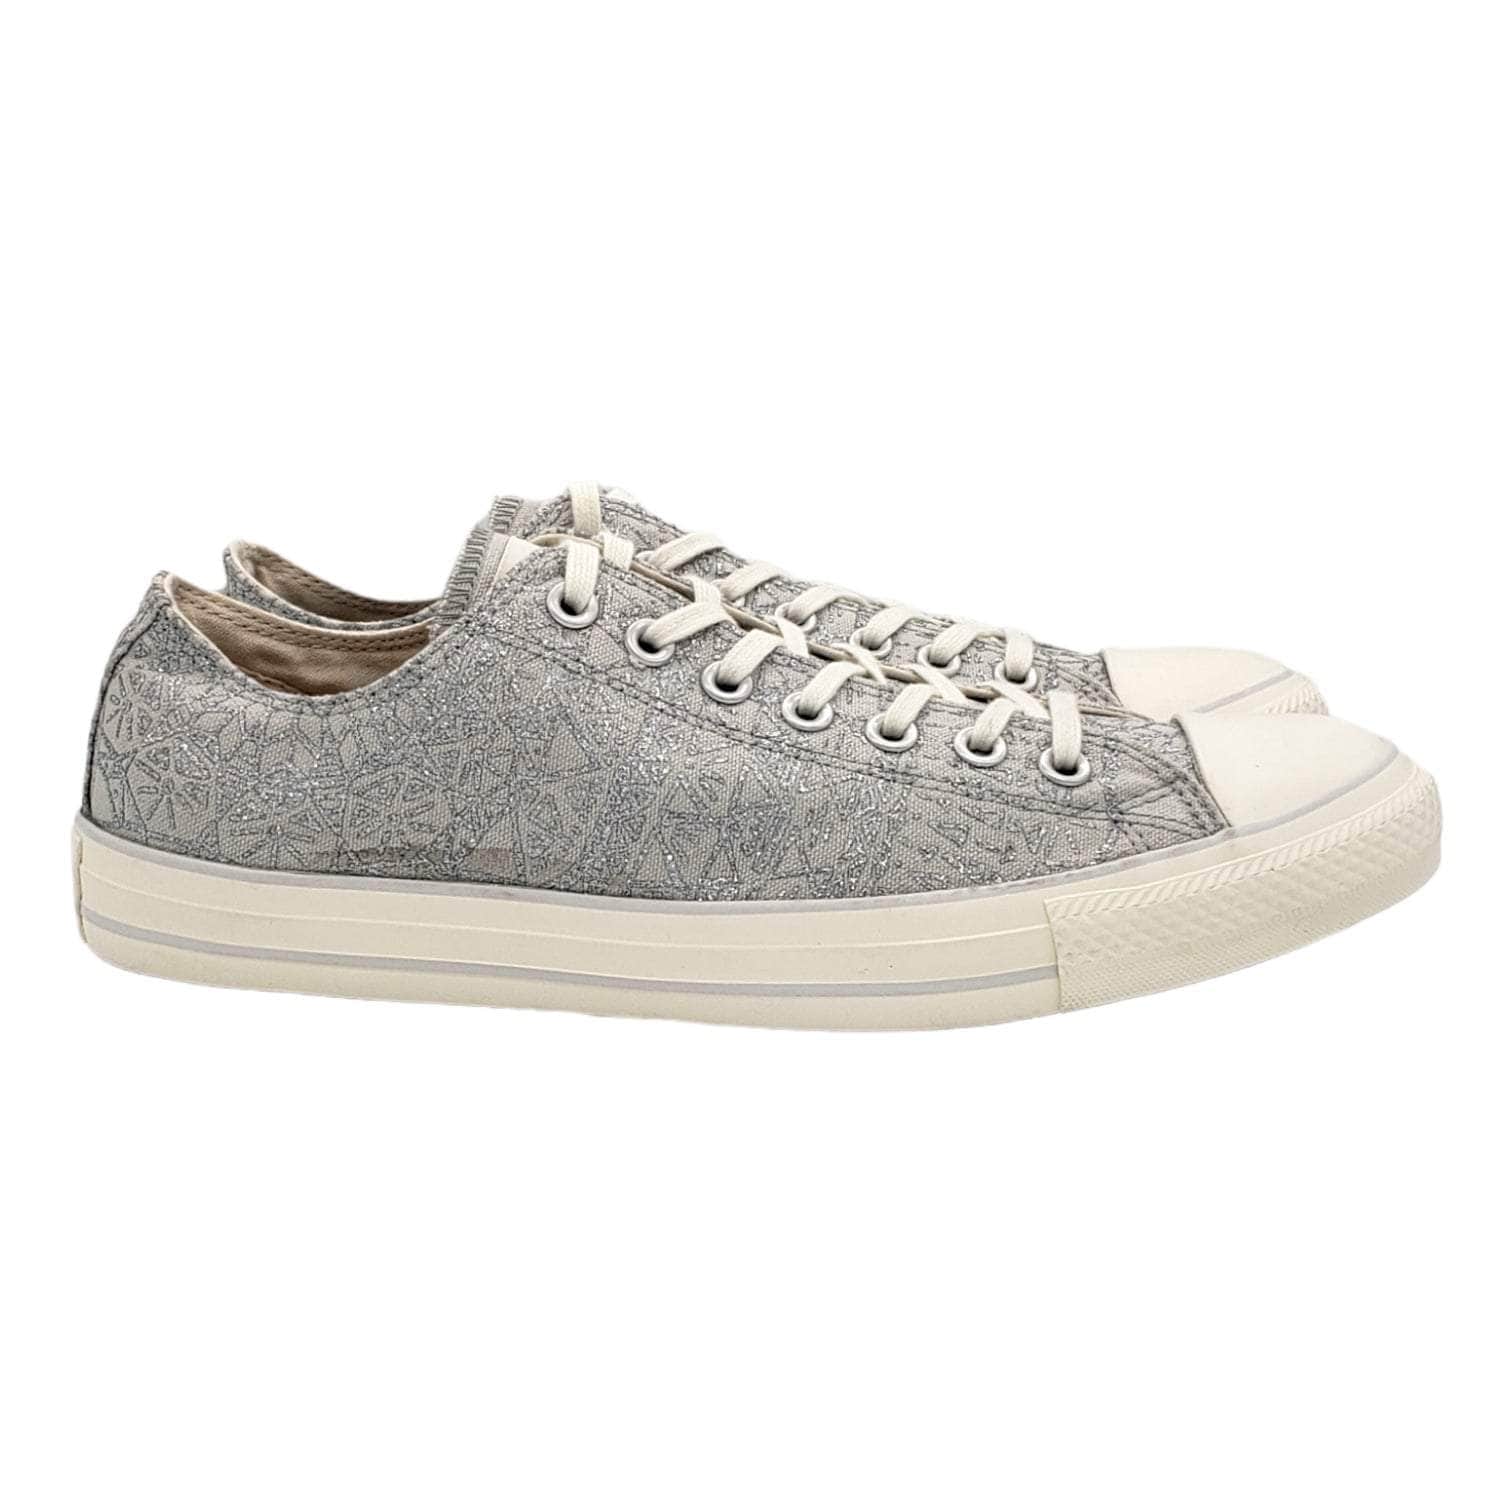 Converse Silver Glitter Lace Up Trainers